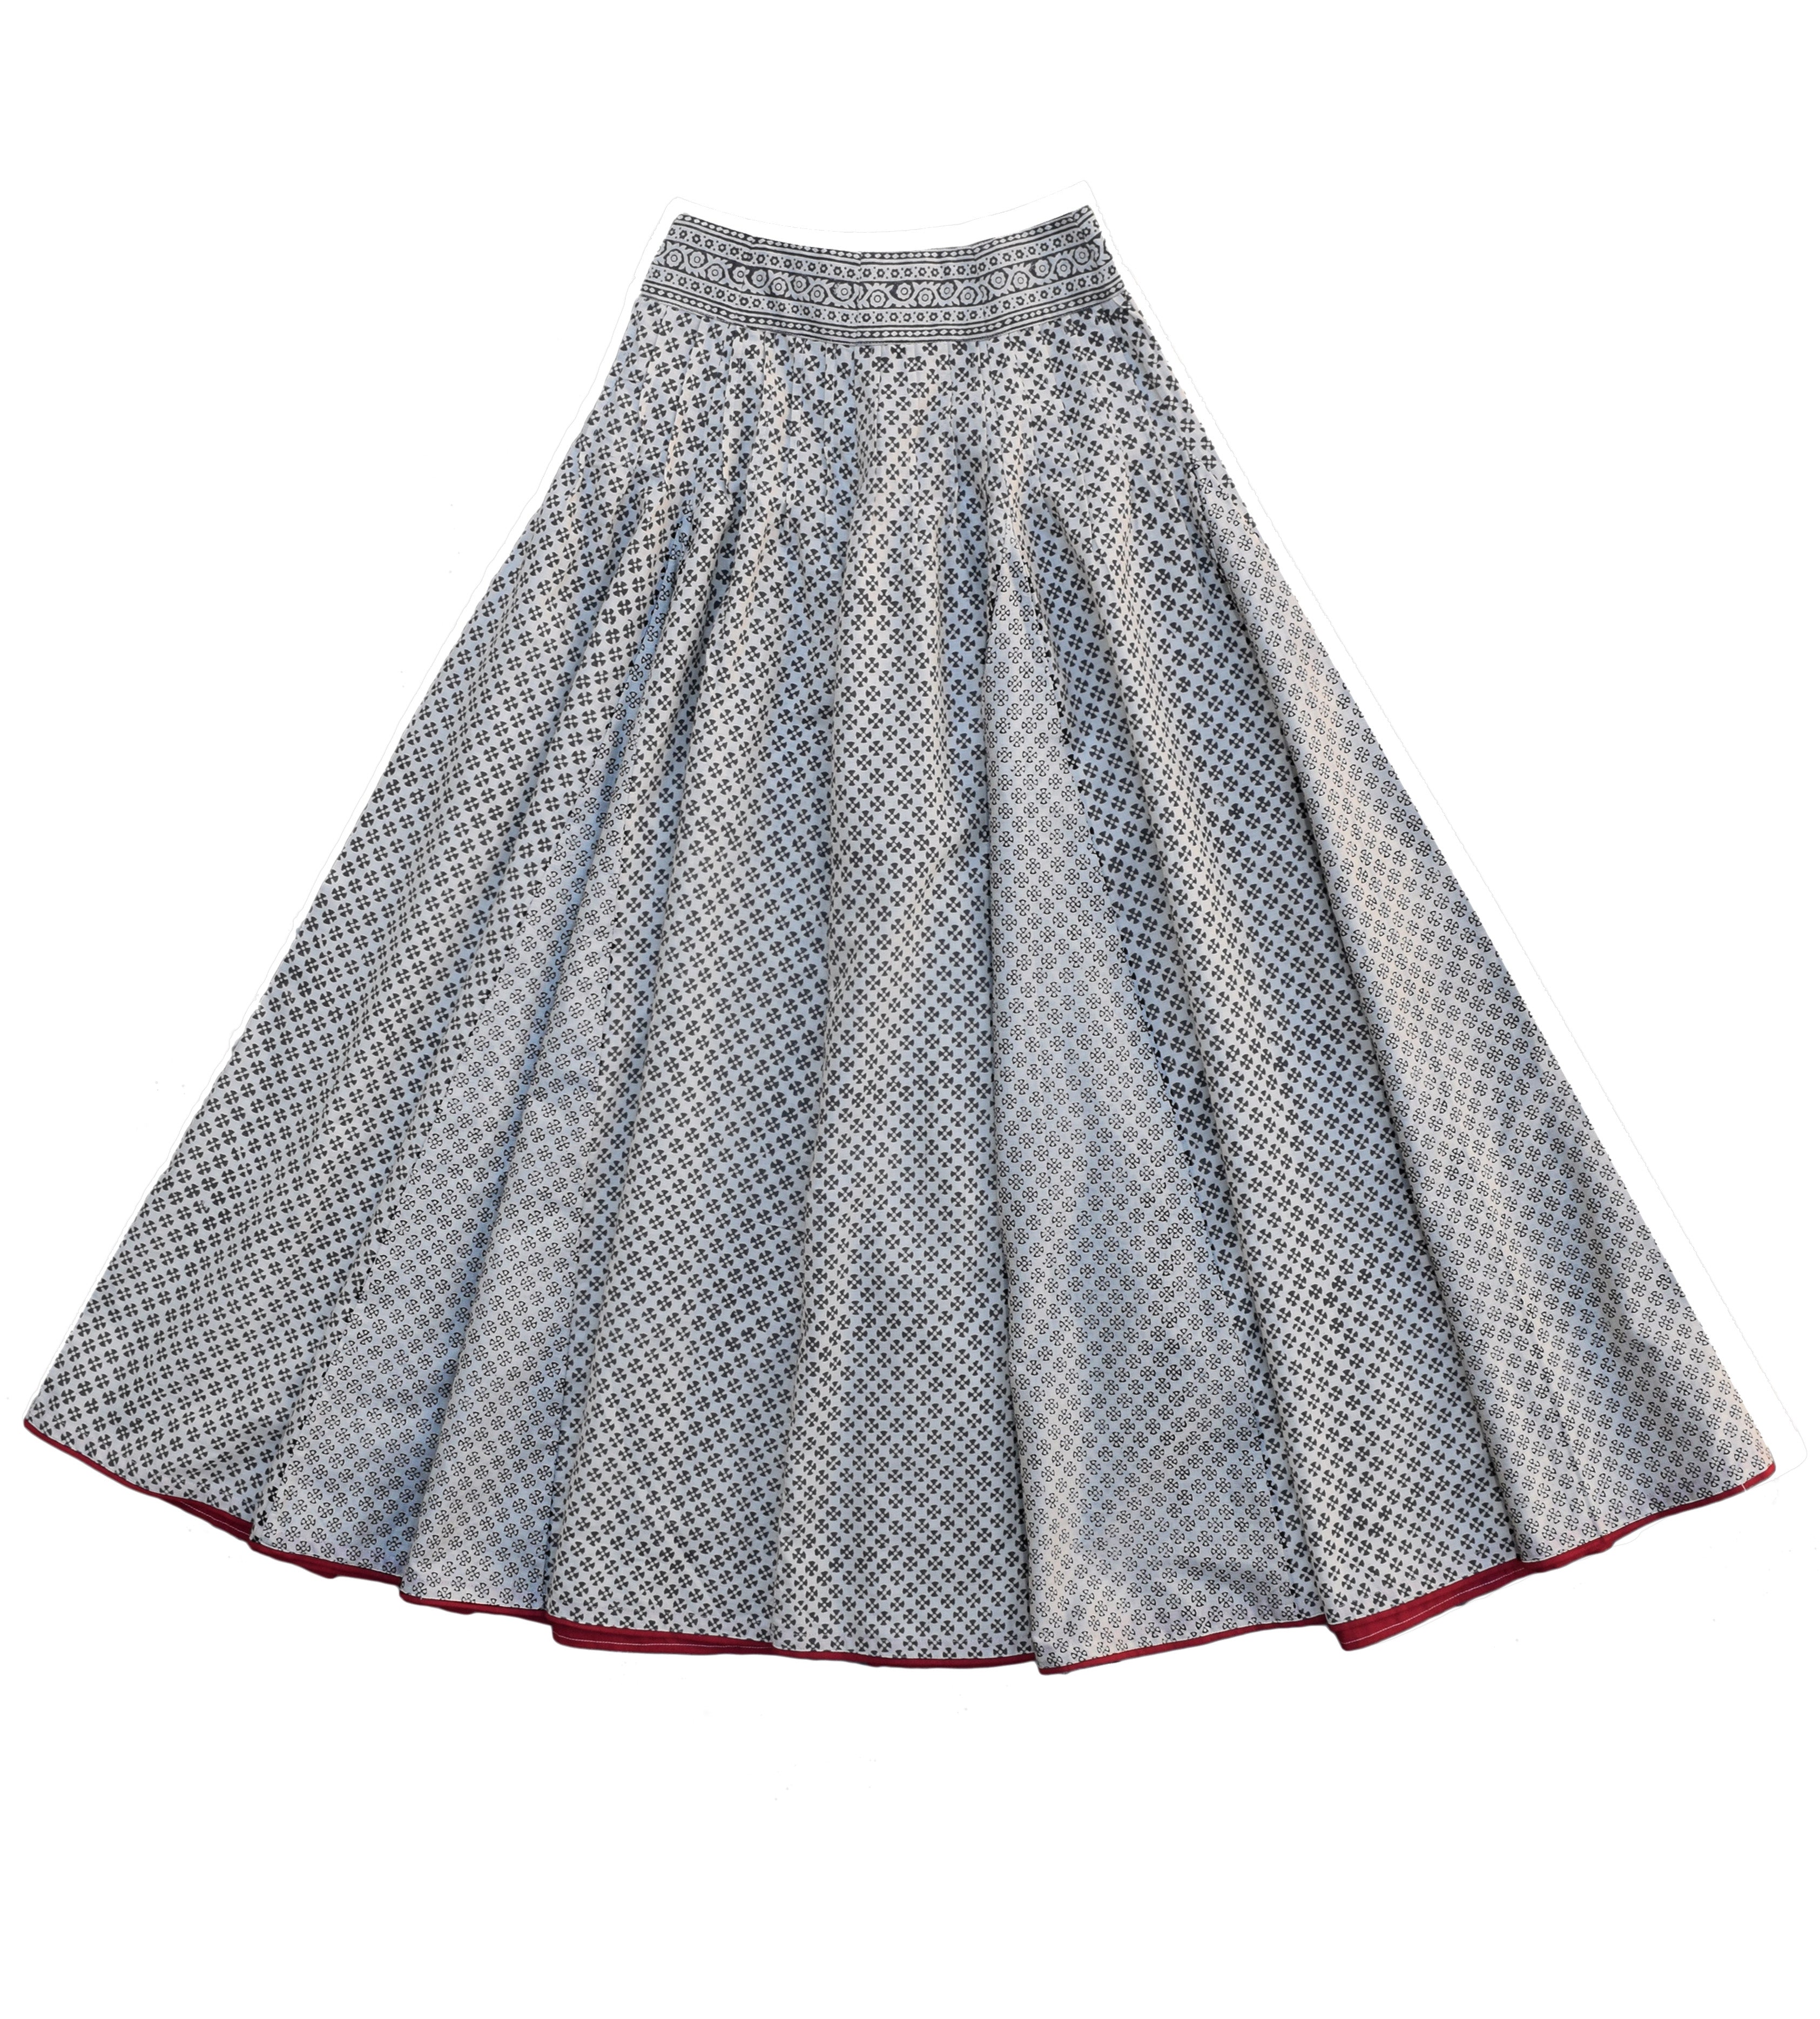 Check styling ideas for「Satin Narrow Flare Skirt」| UNIQLO US